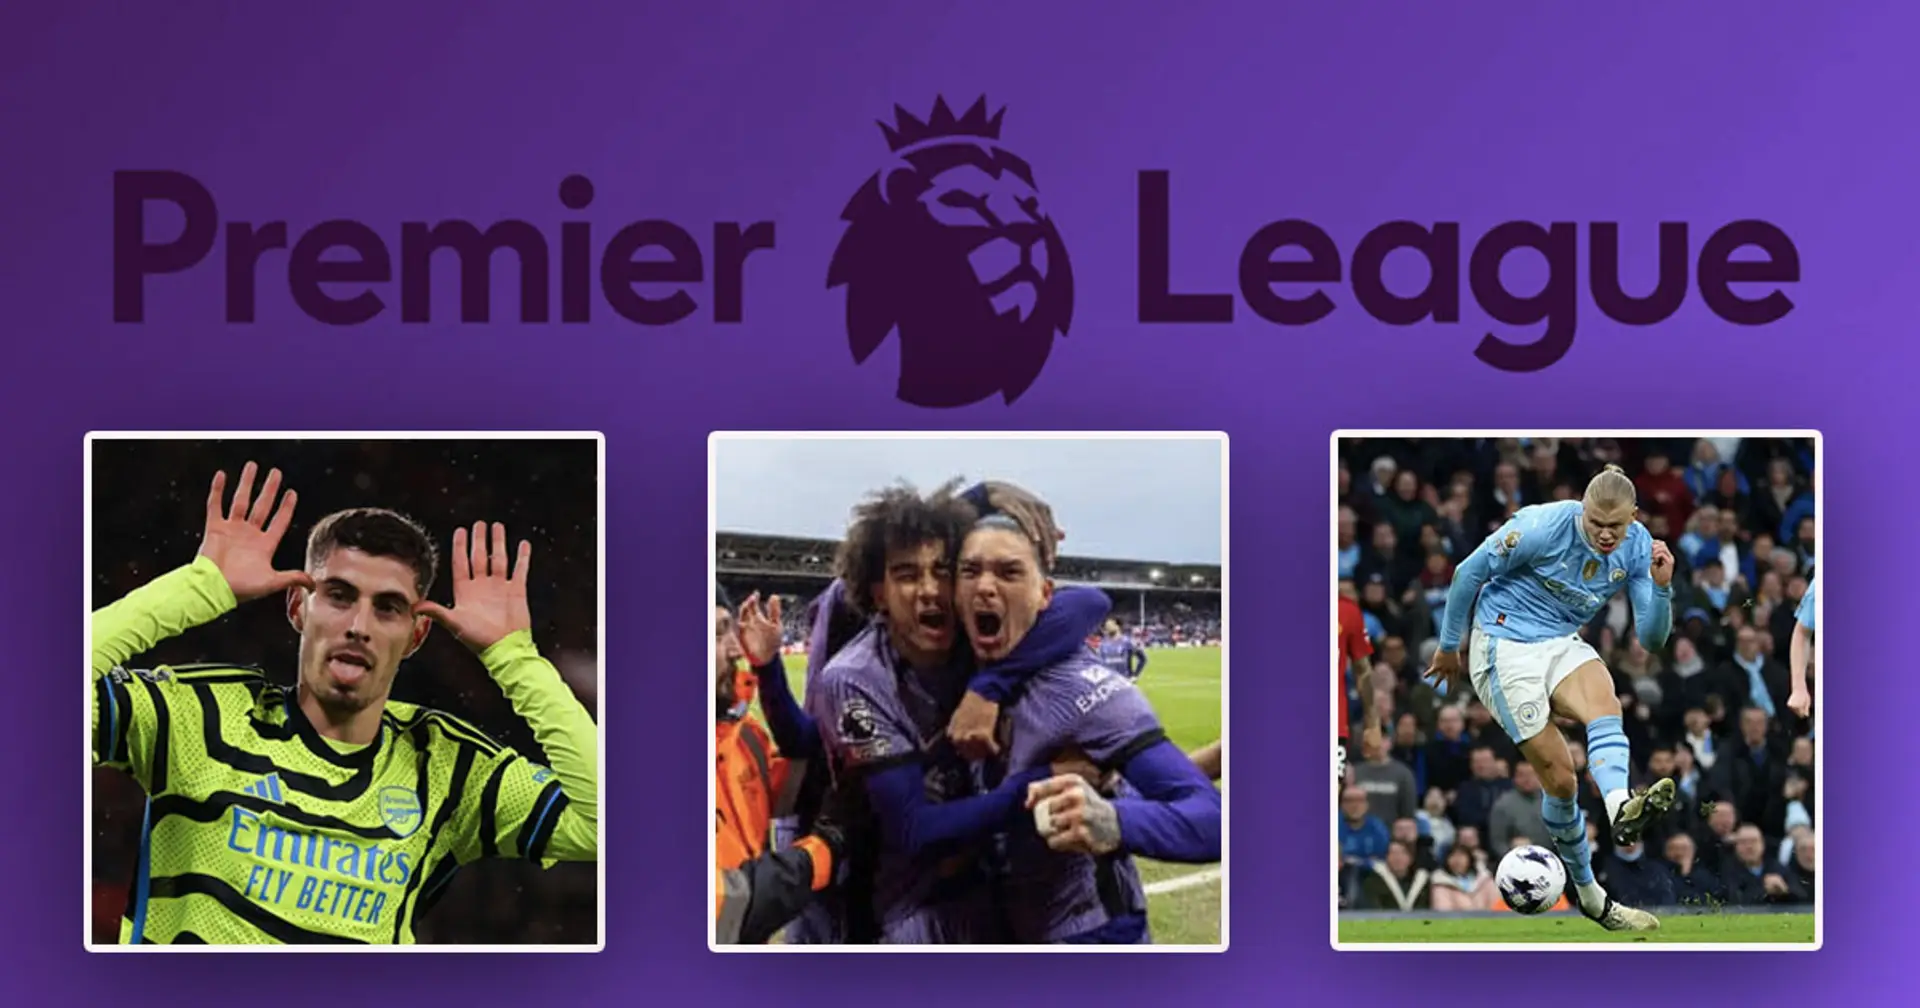 Premier League GW27 recap: disappointing Liverpool, Arsenal exceed expectations